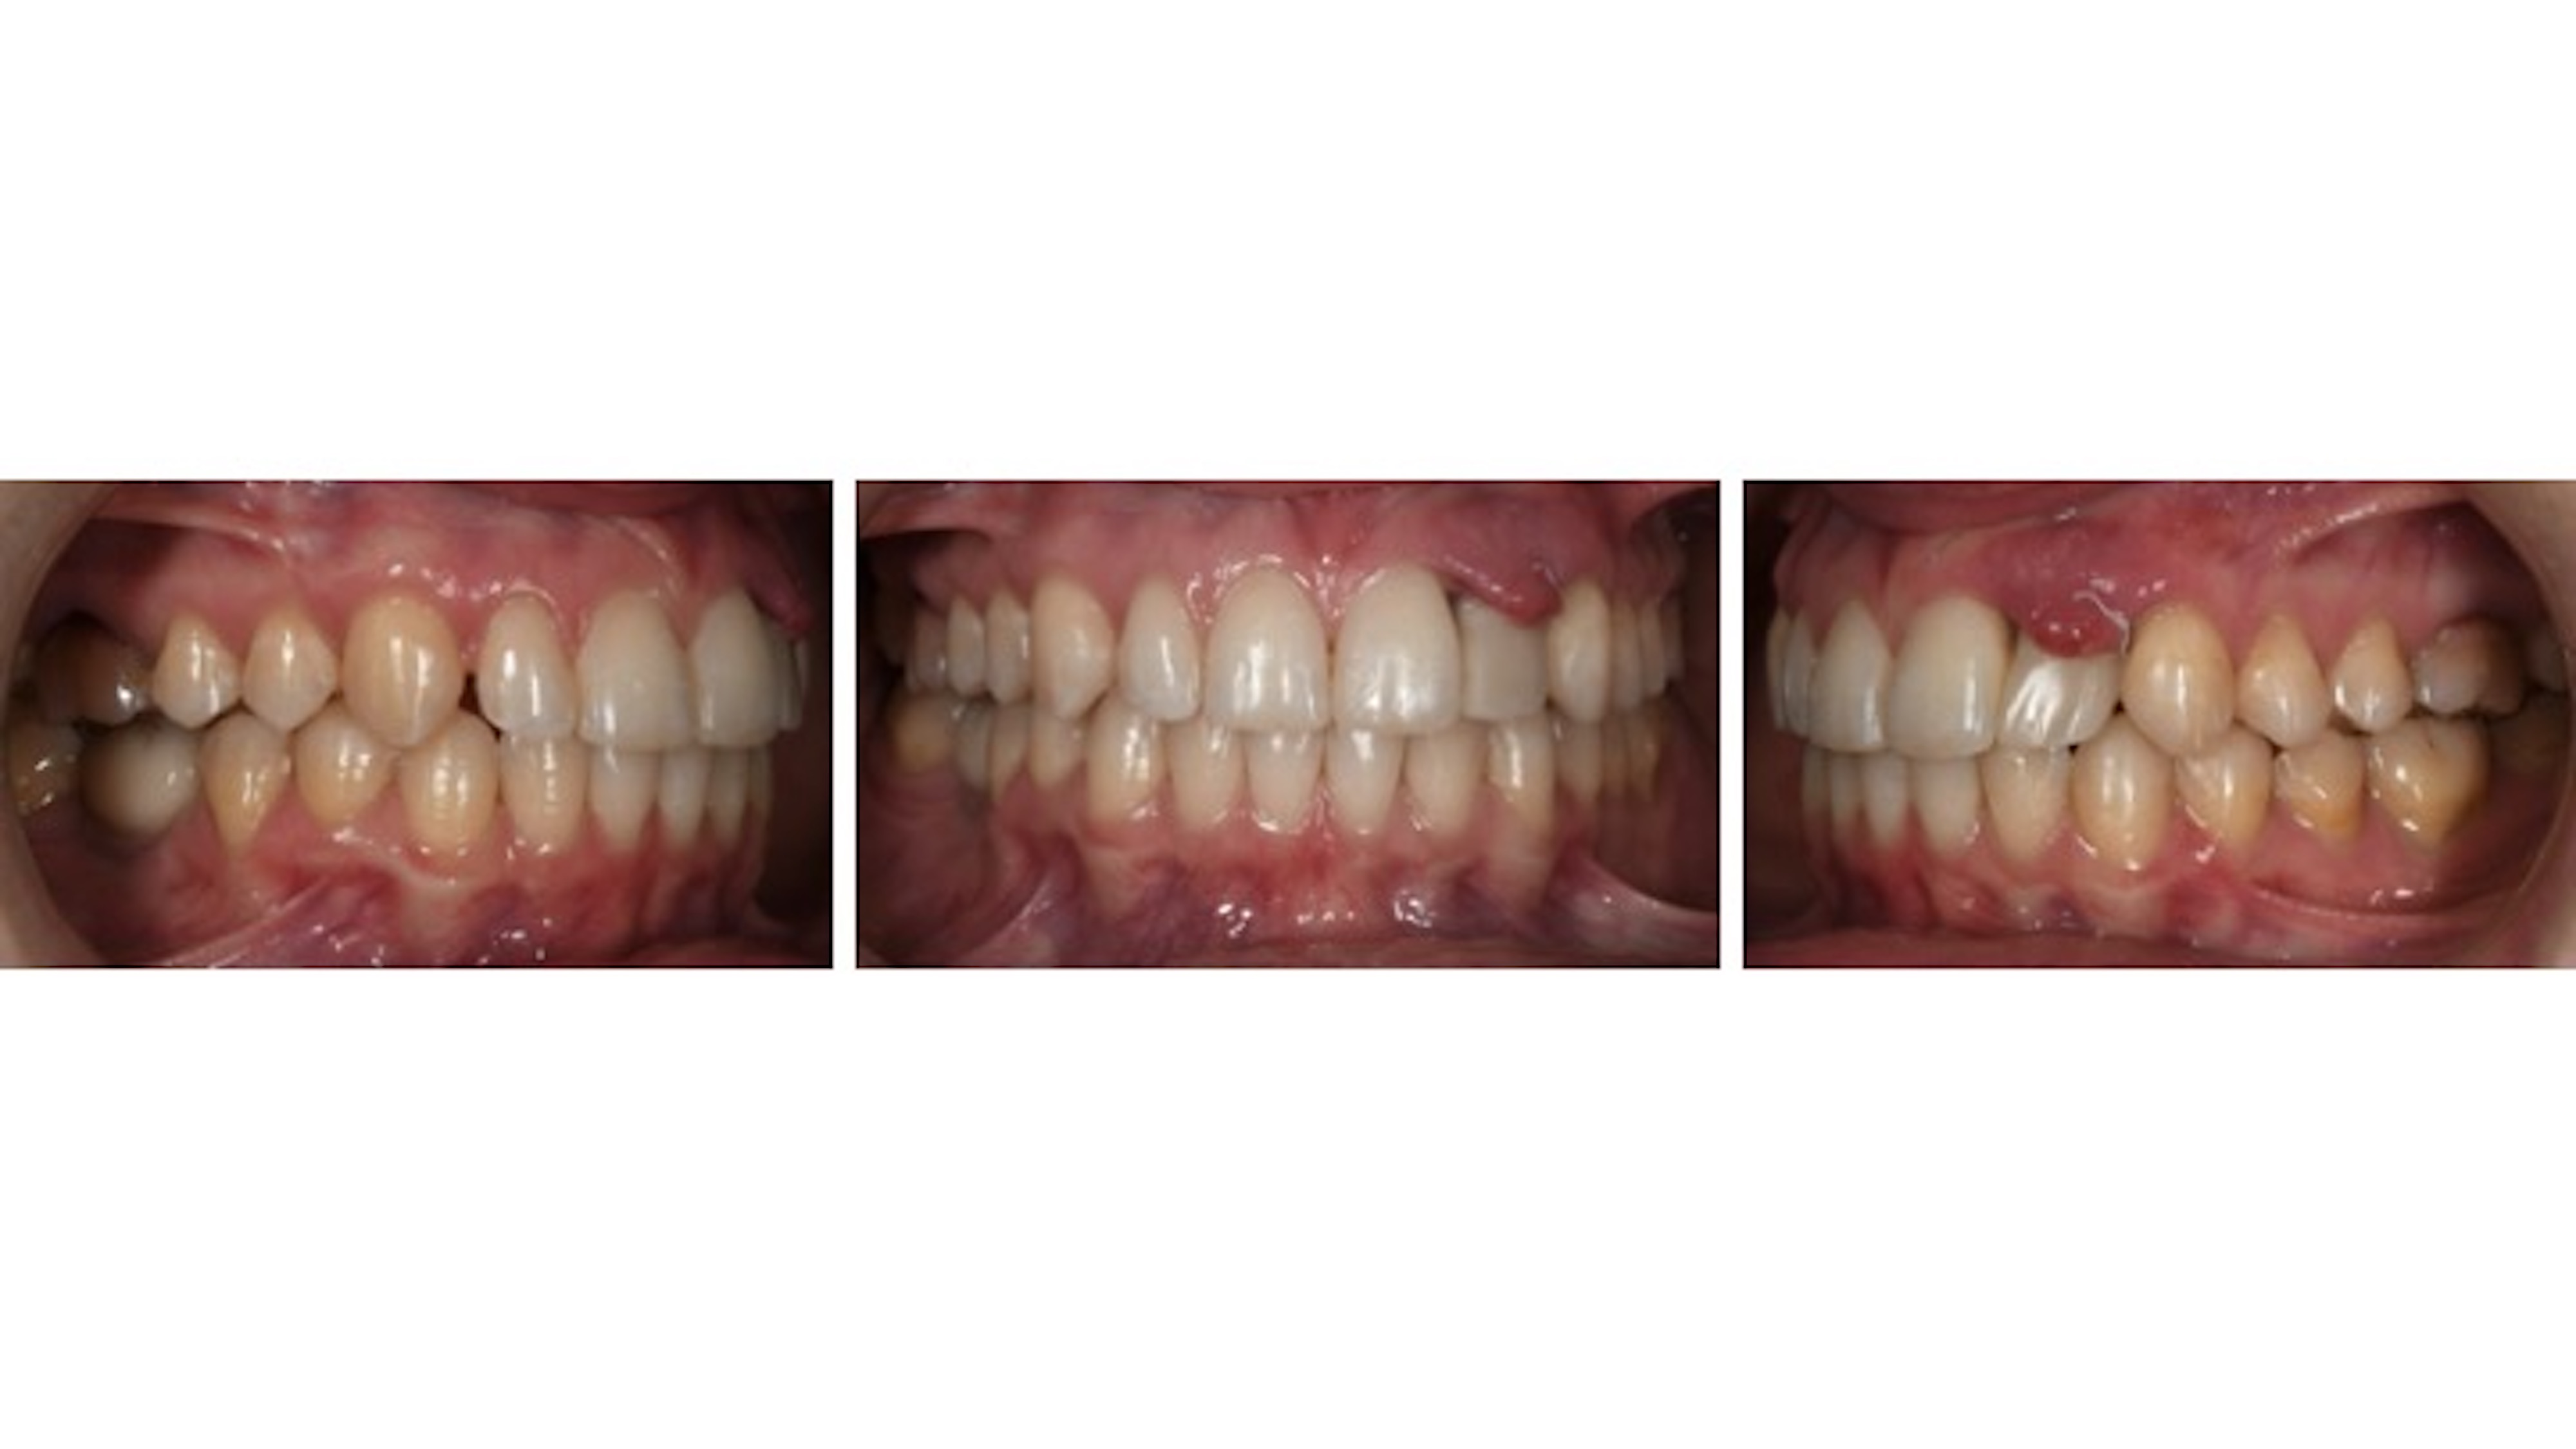 Figs. 10a–c: Lateral and frontal intra-oral photographs after orthodontic treatment and implant placement. Tooth #12 had not yet been prosthetically restored.